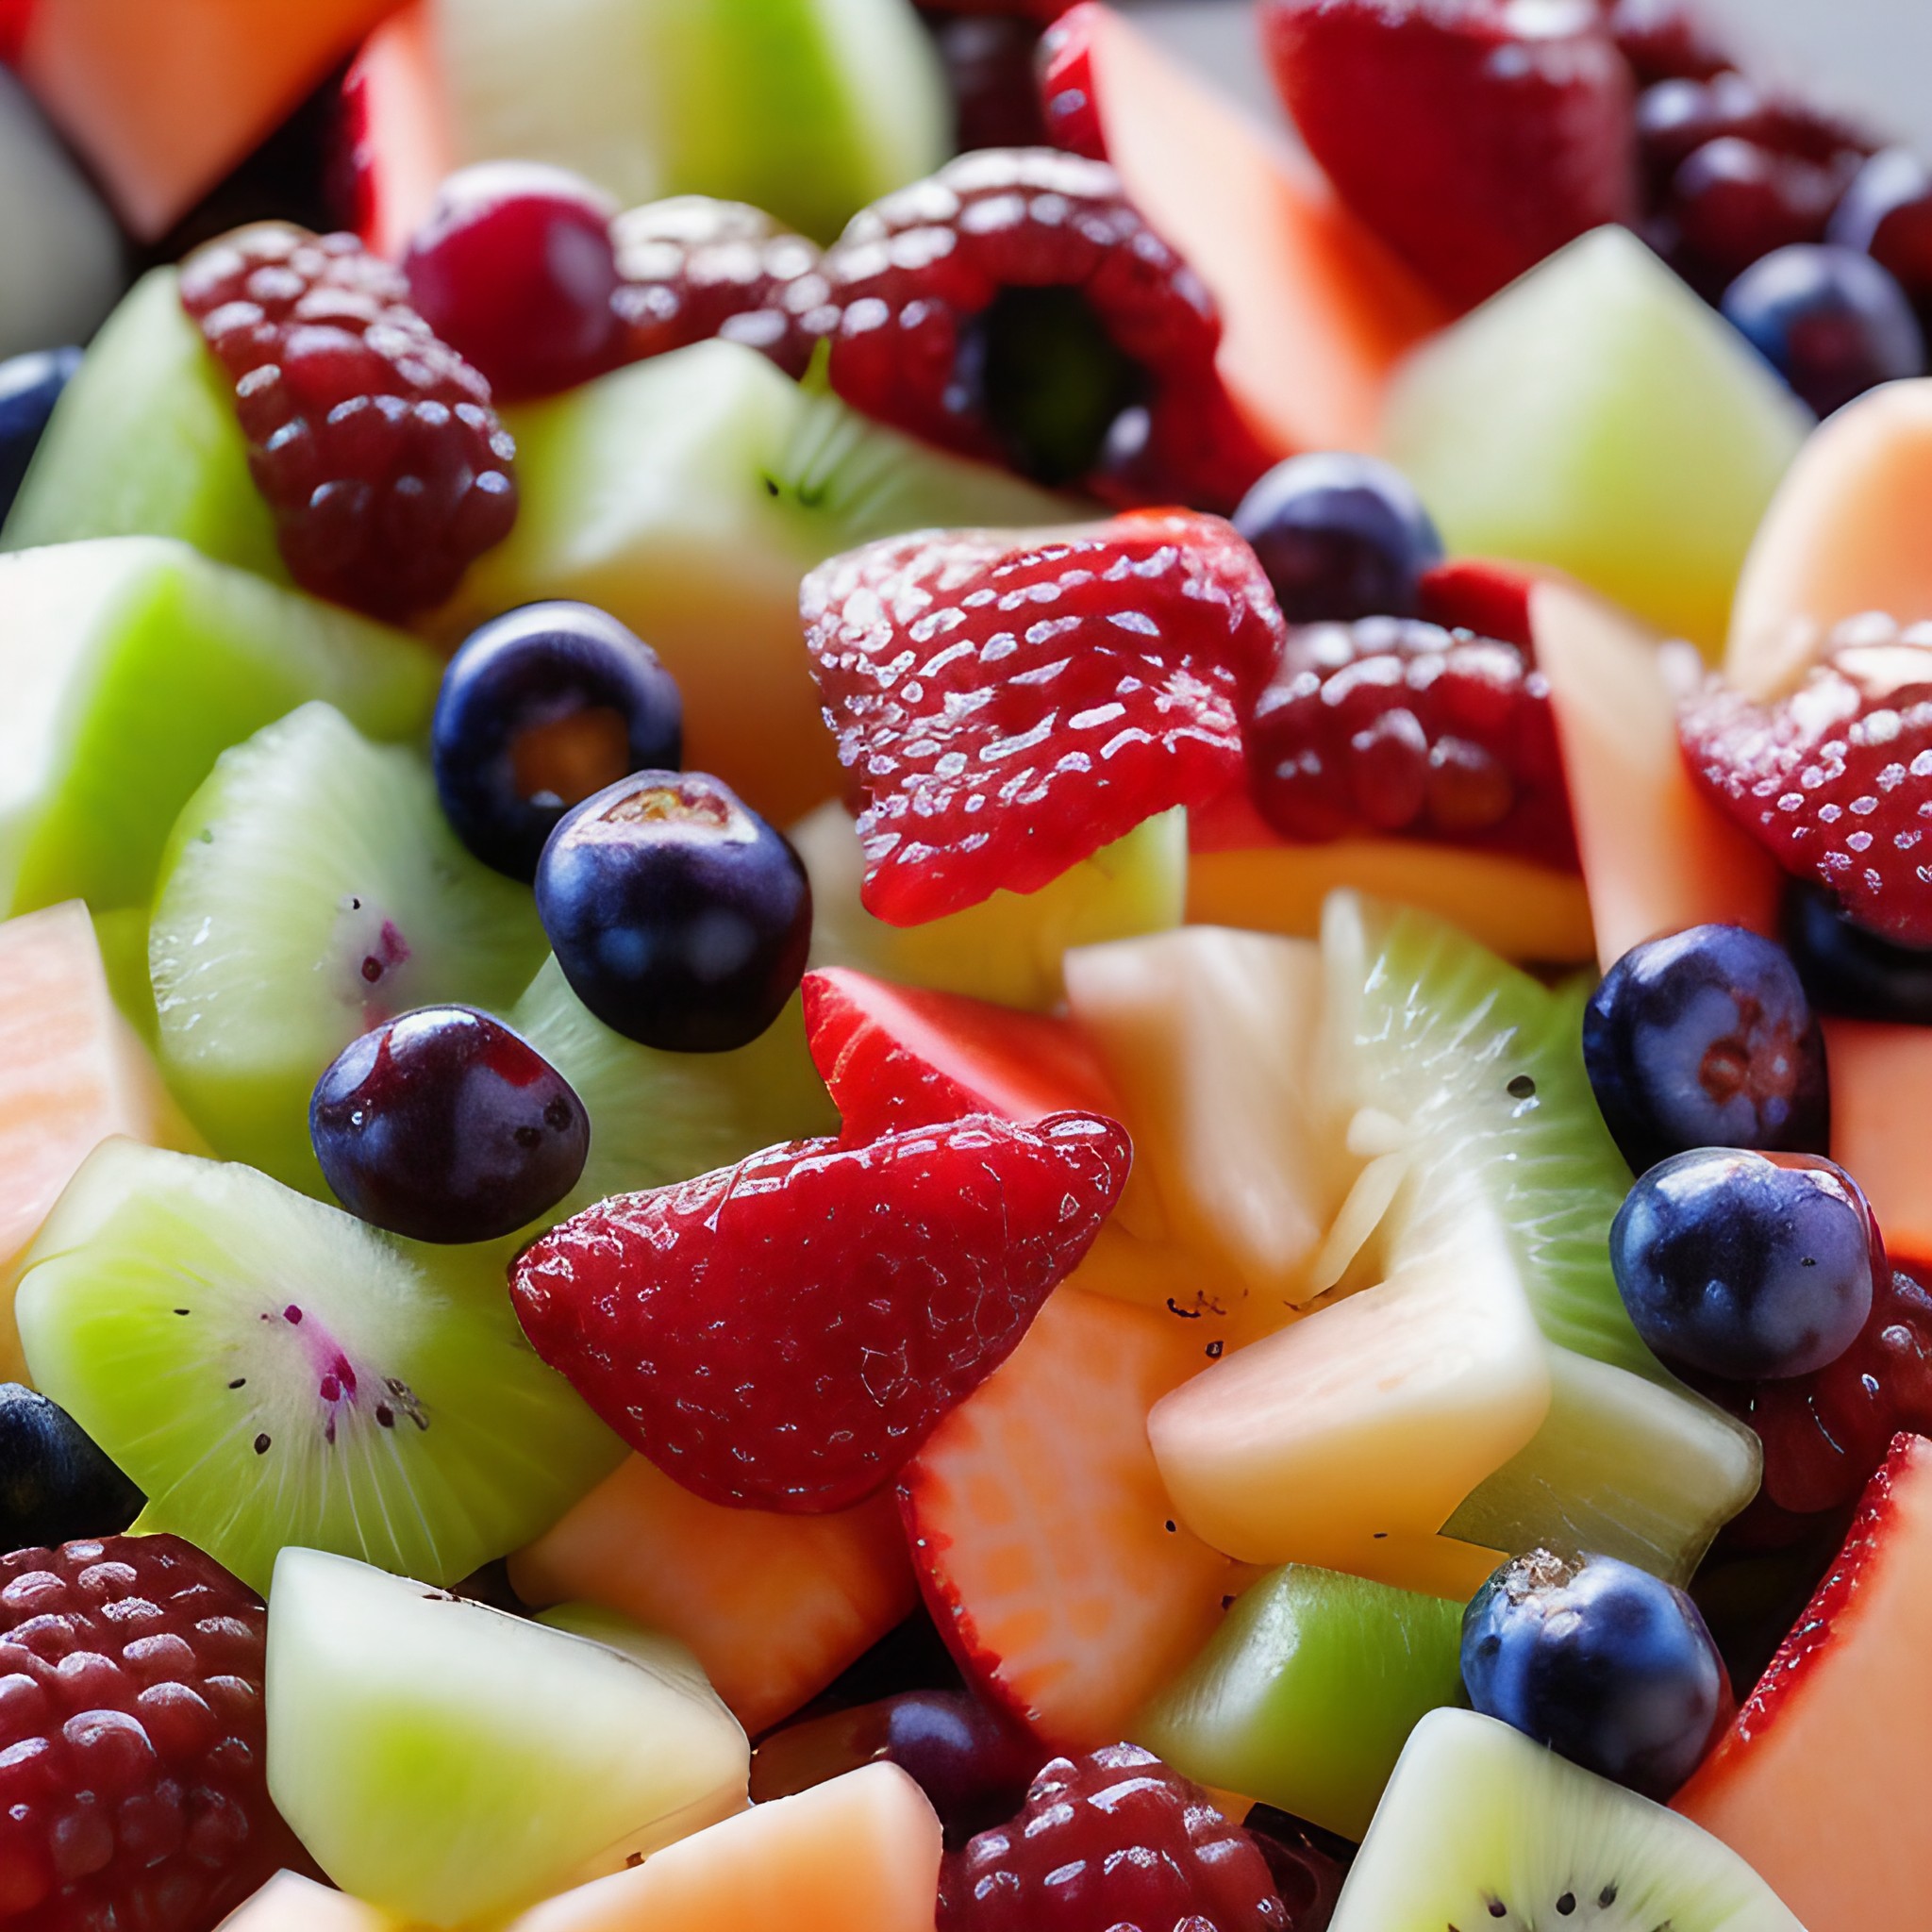 Best Fruit Salad For Weight Loss | Berry Salad